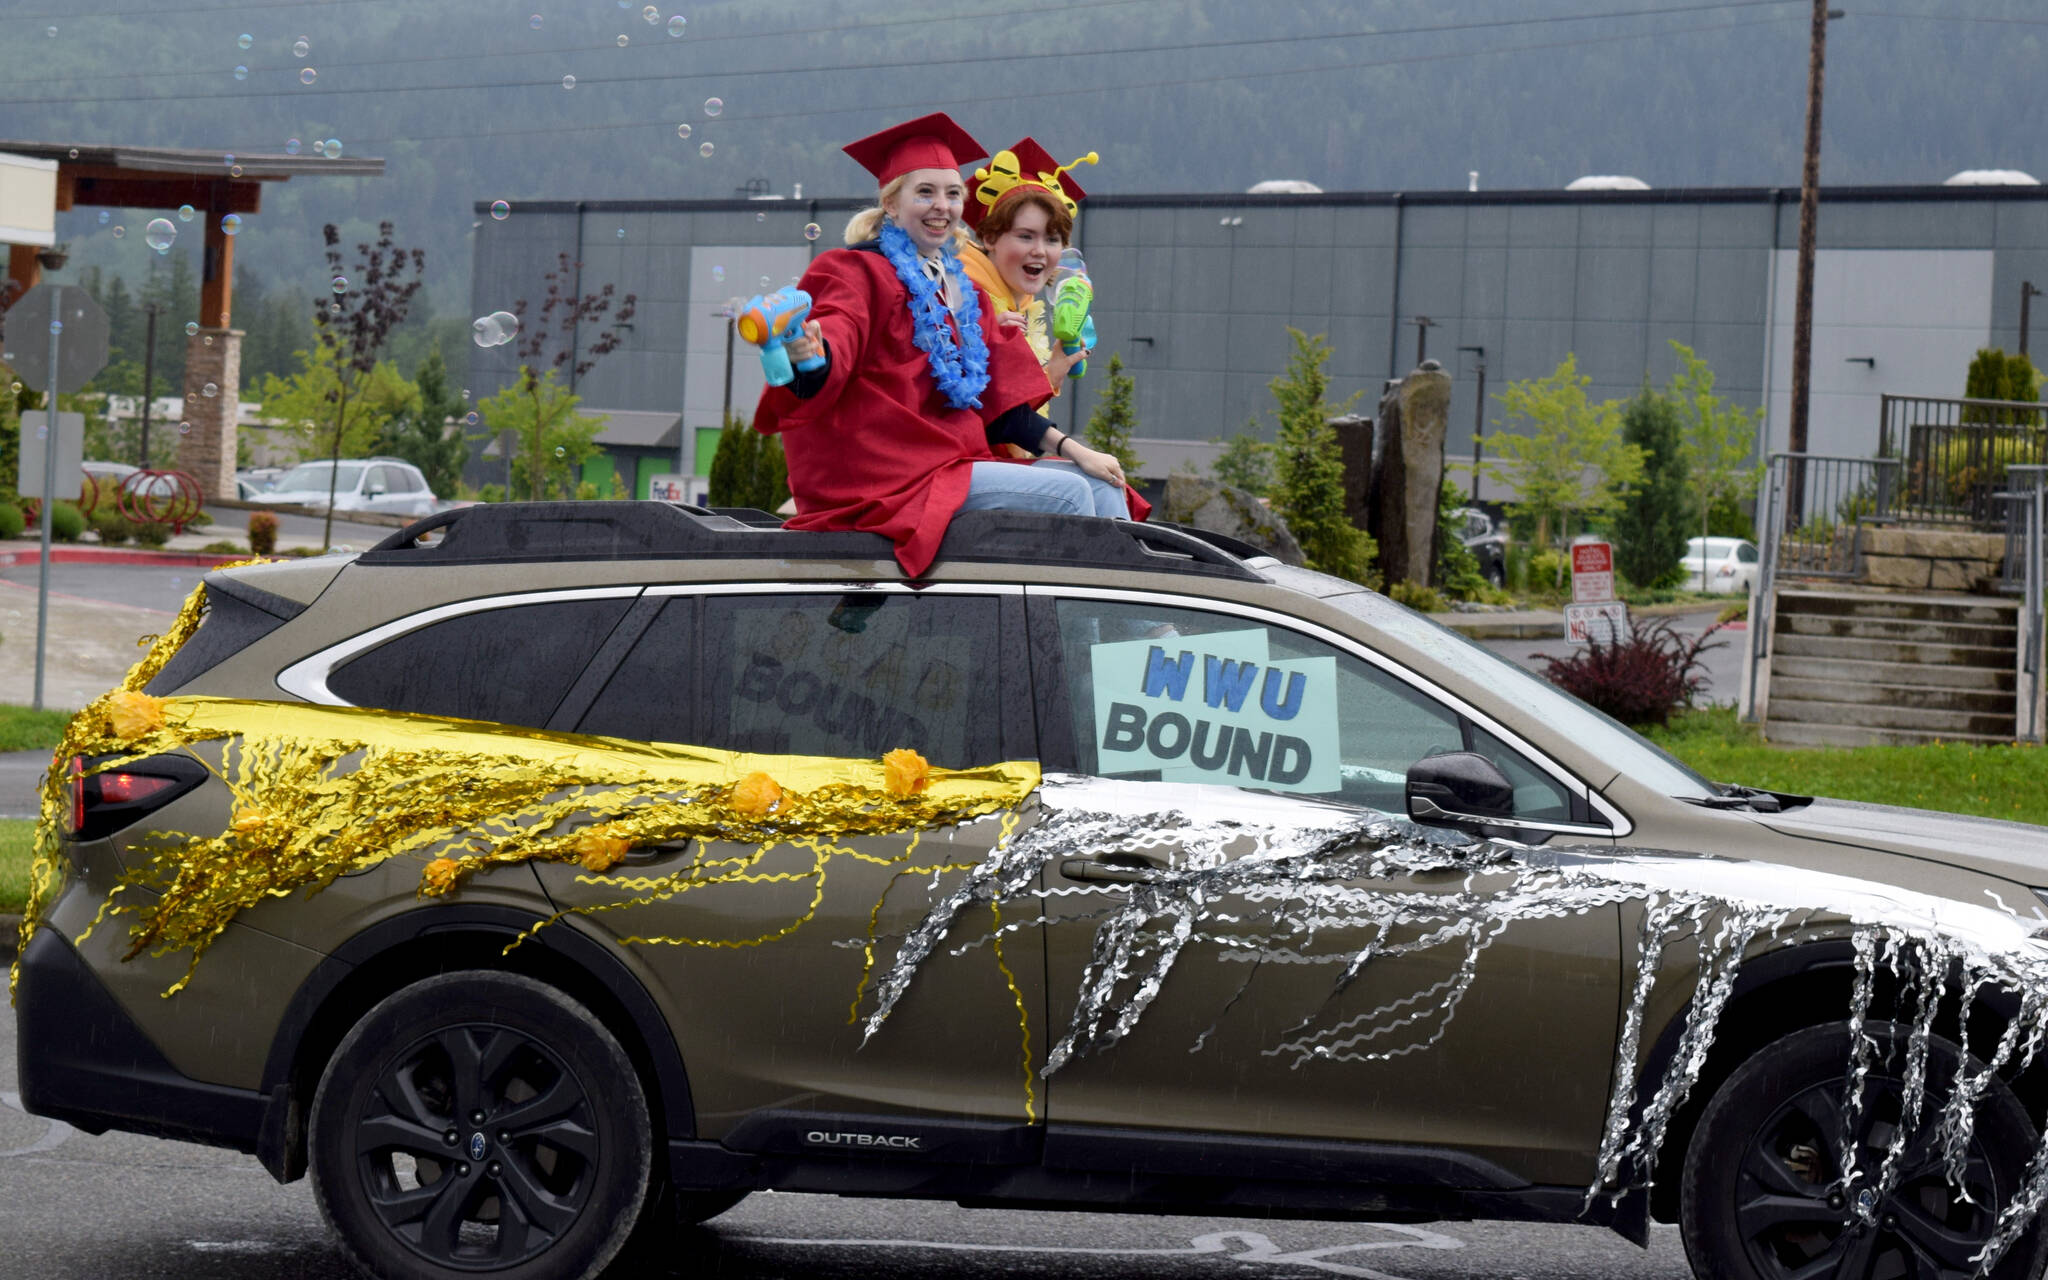 Mount Si High School seniors wave to parade watchers during during the Senior Car Parade on Saturday, June 4. The class of 2022 will hold its graduation Friday, June 10, at the ShoWare Center in Kent. Photo by Conor Wilson/Valley Record.